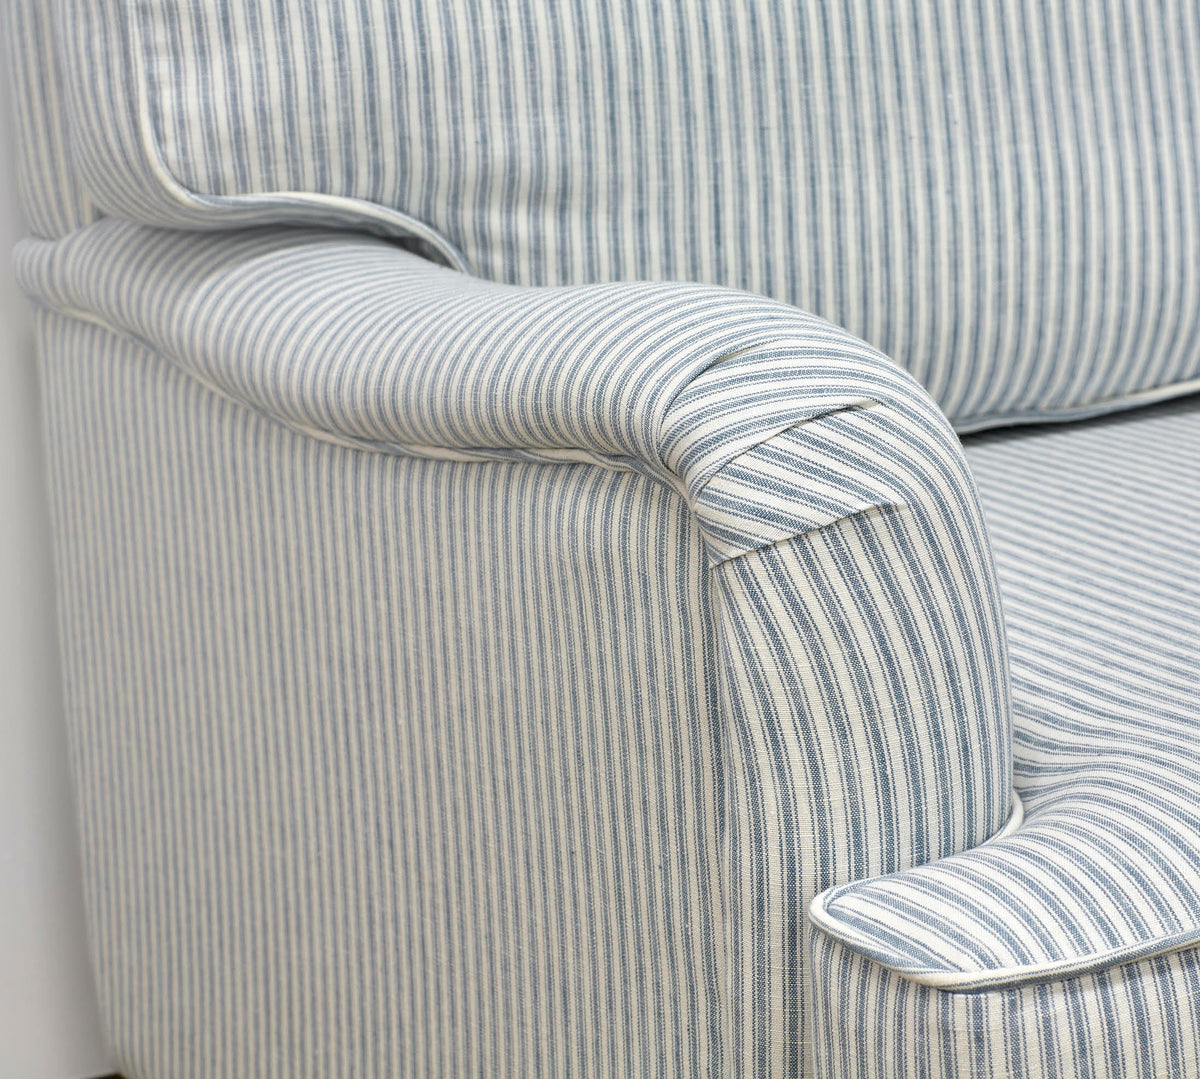 Blue Striped Linen Roll Arm Sofa - 2 Sizes Available